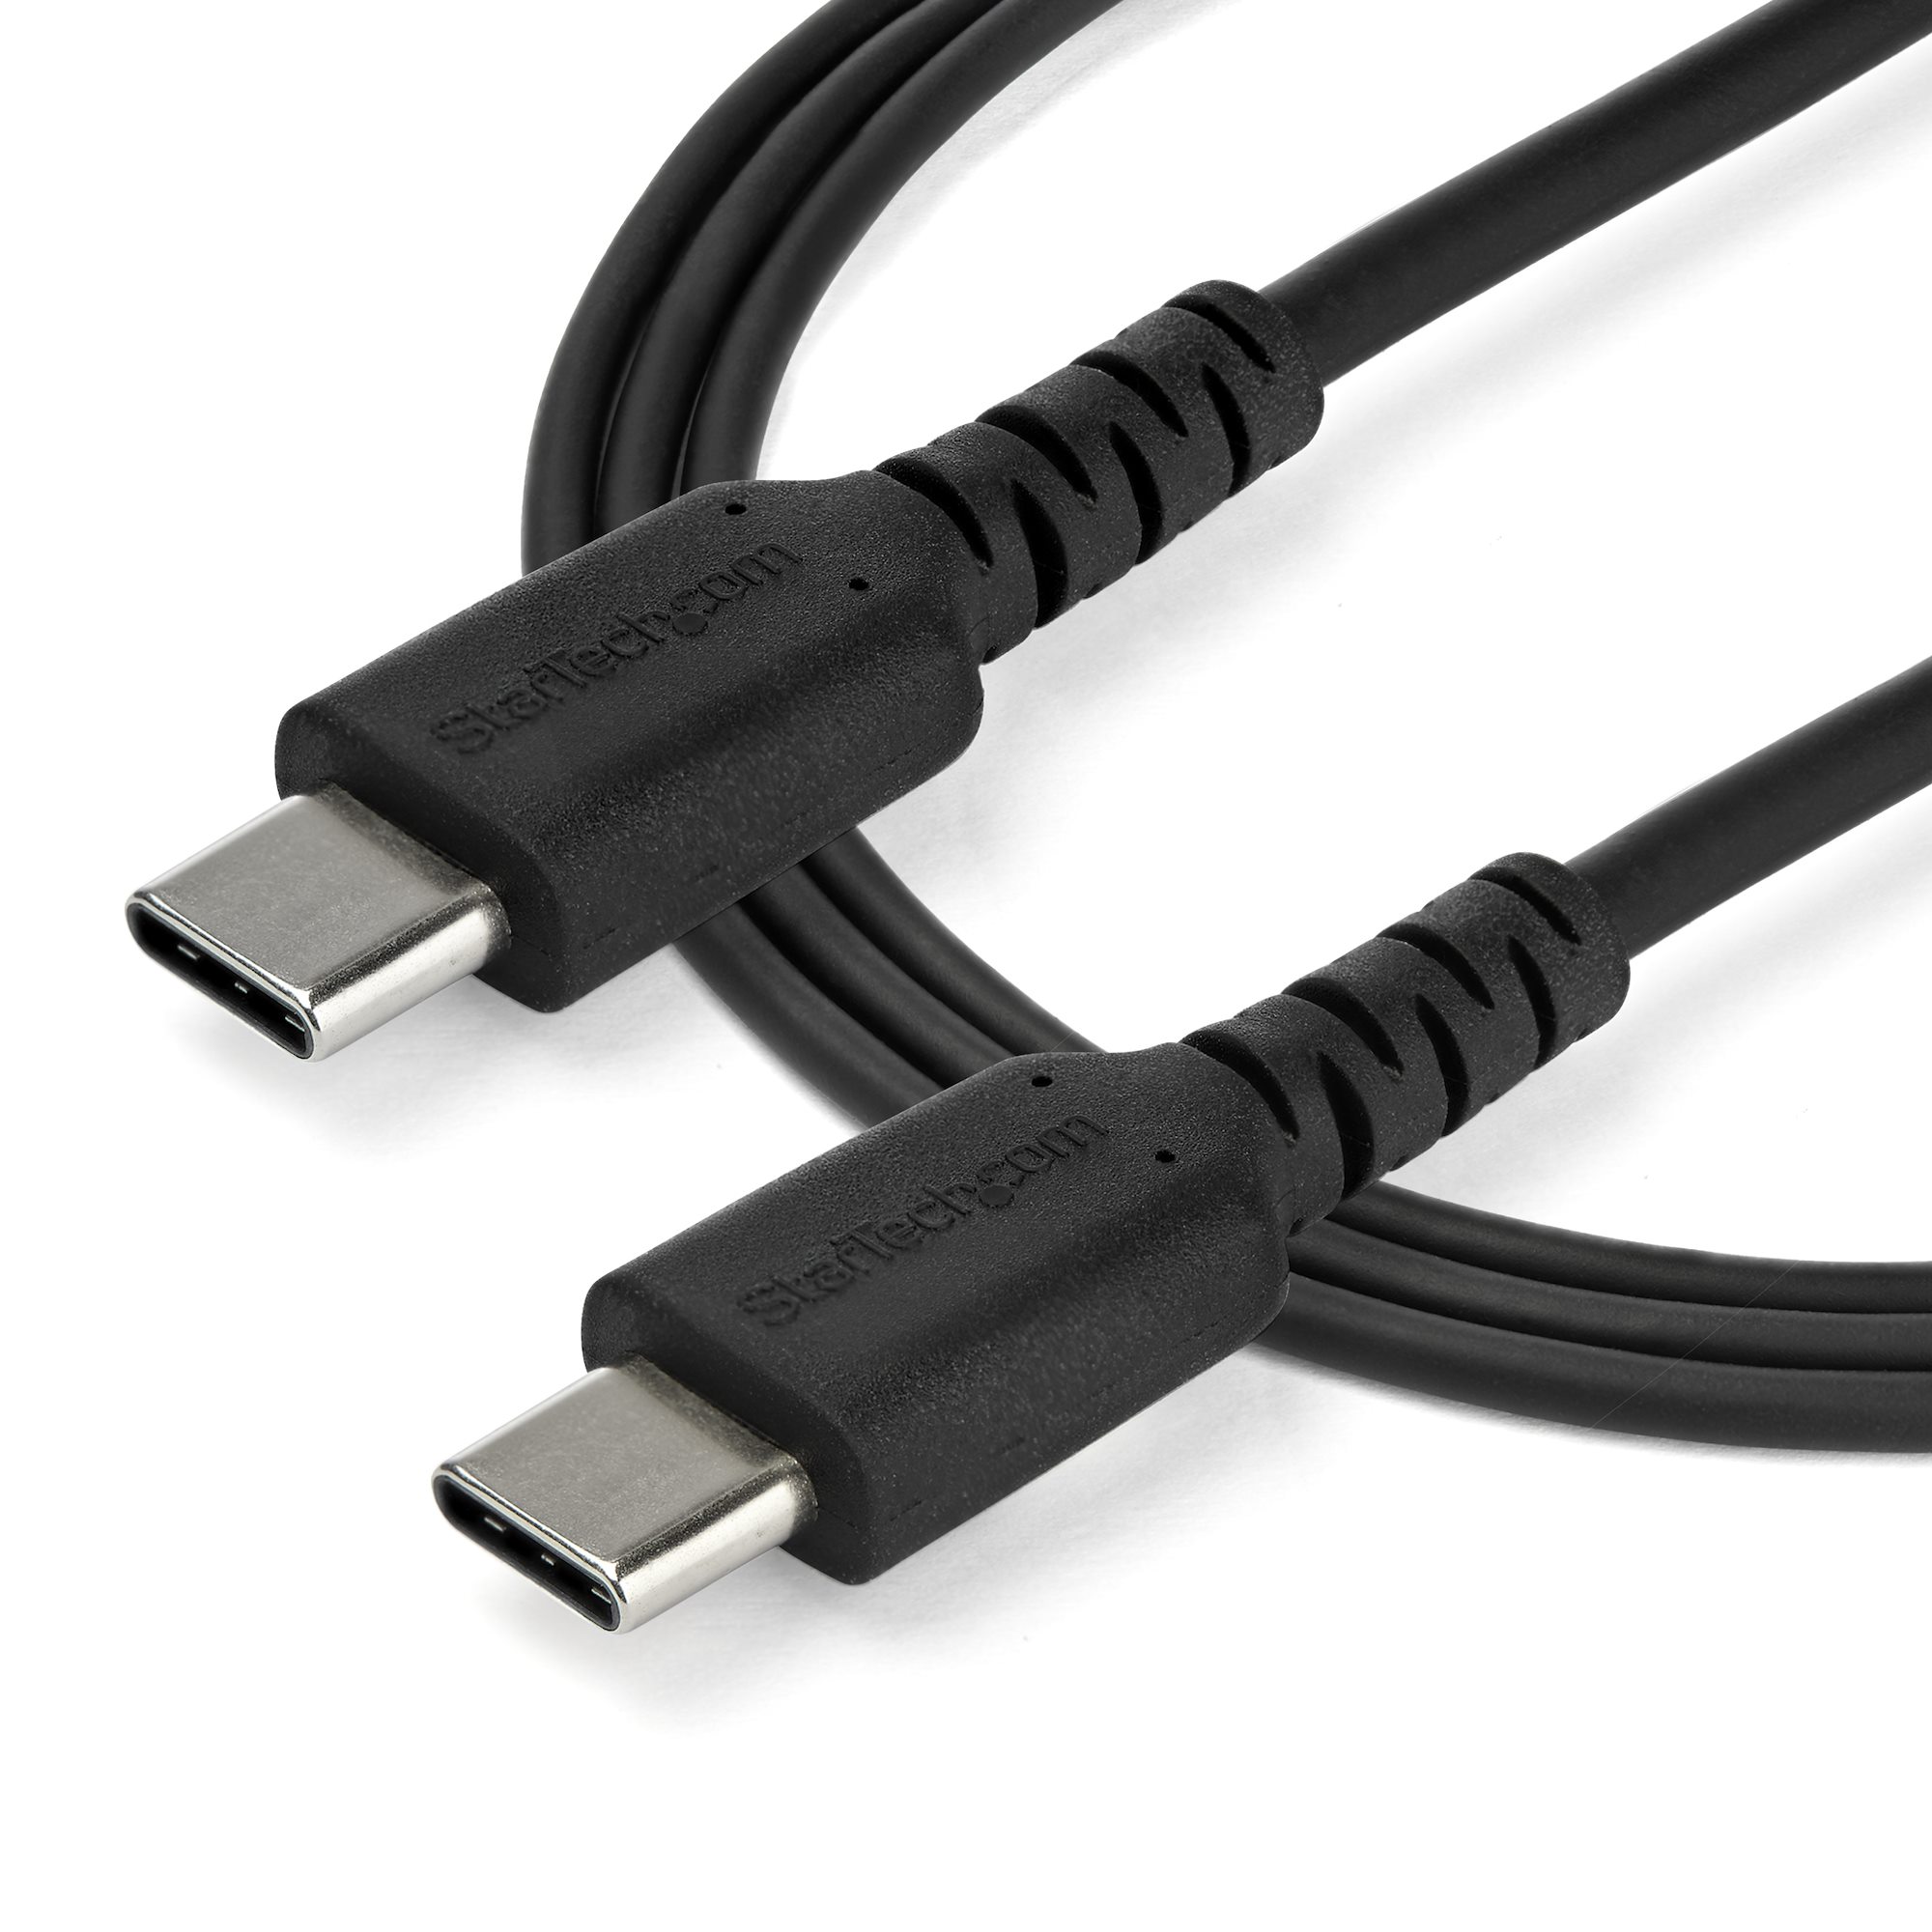 USB-C to USB-C Cable - Fast Charging Cord